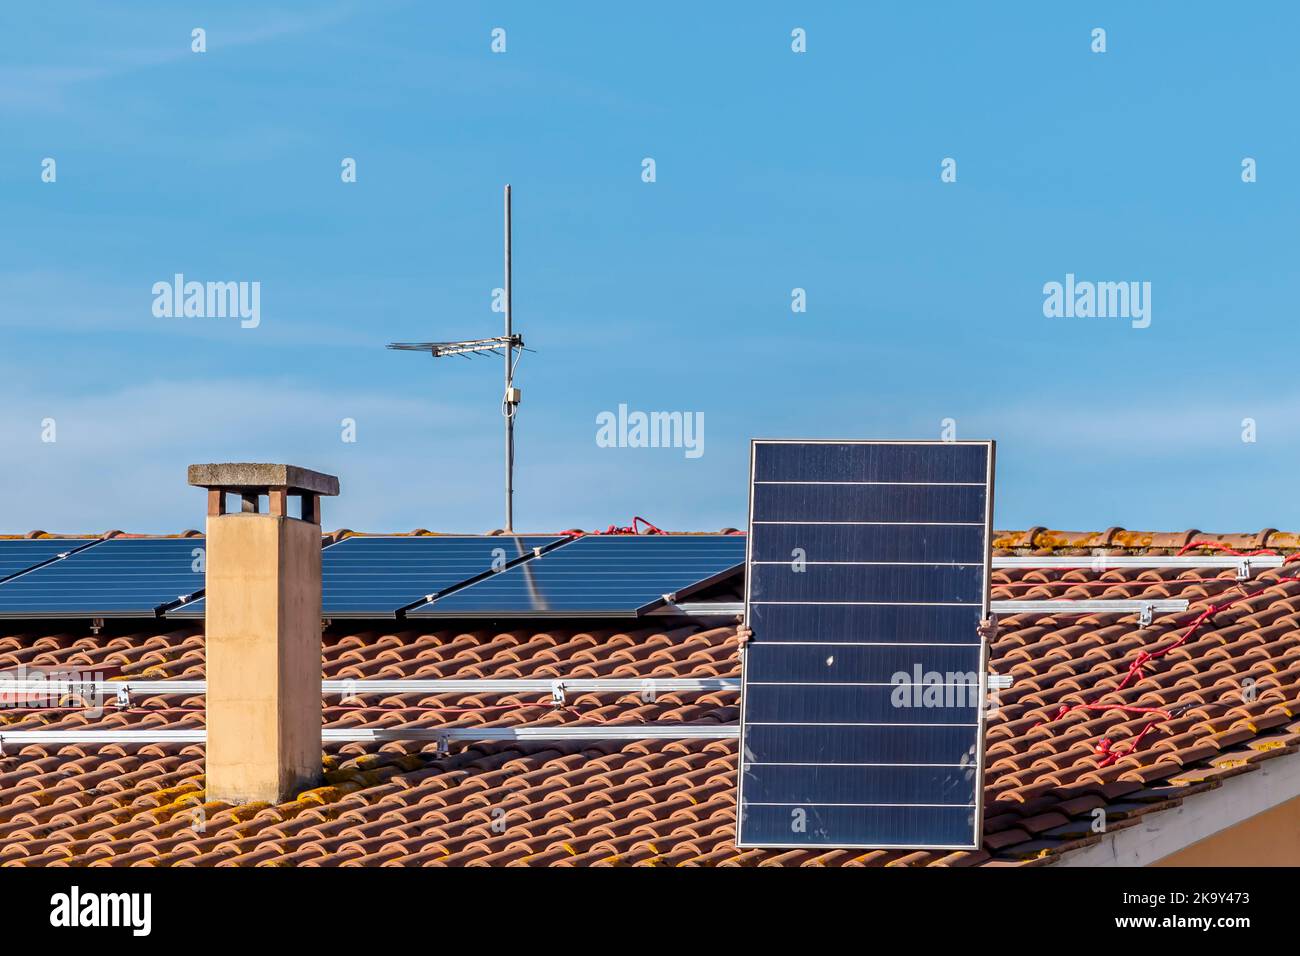 A solar panel is lifted by a technician as he prepares to mount it on the roof of a red-tiled house for a photovoltaic system Stock Photo